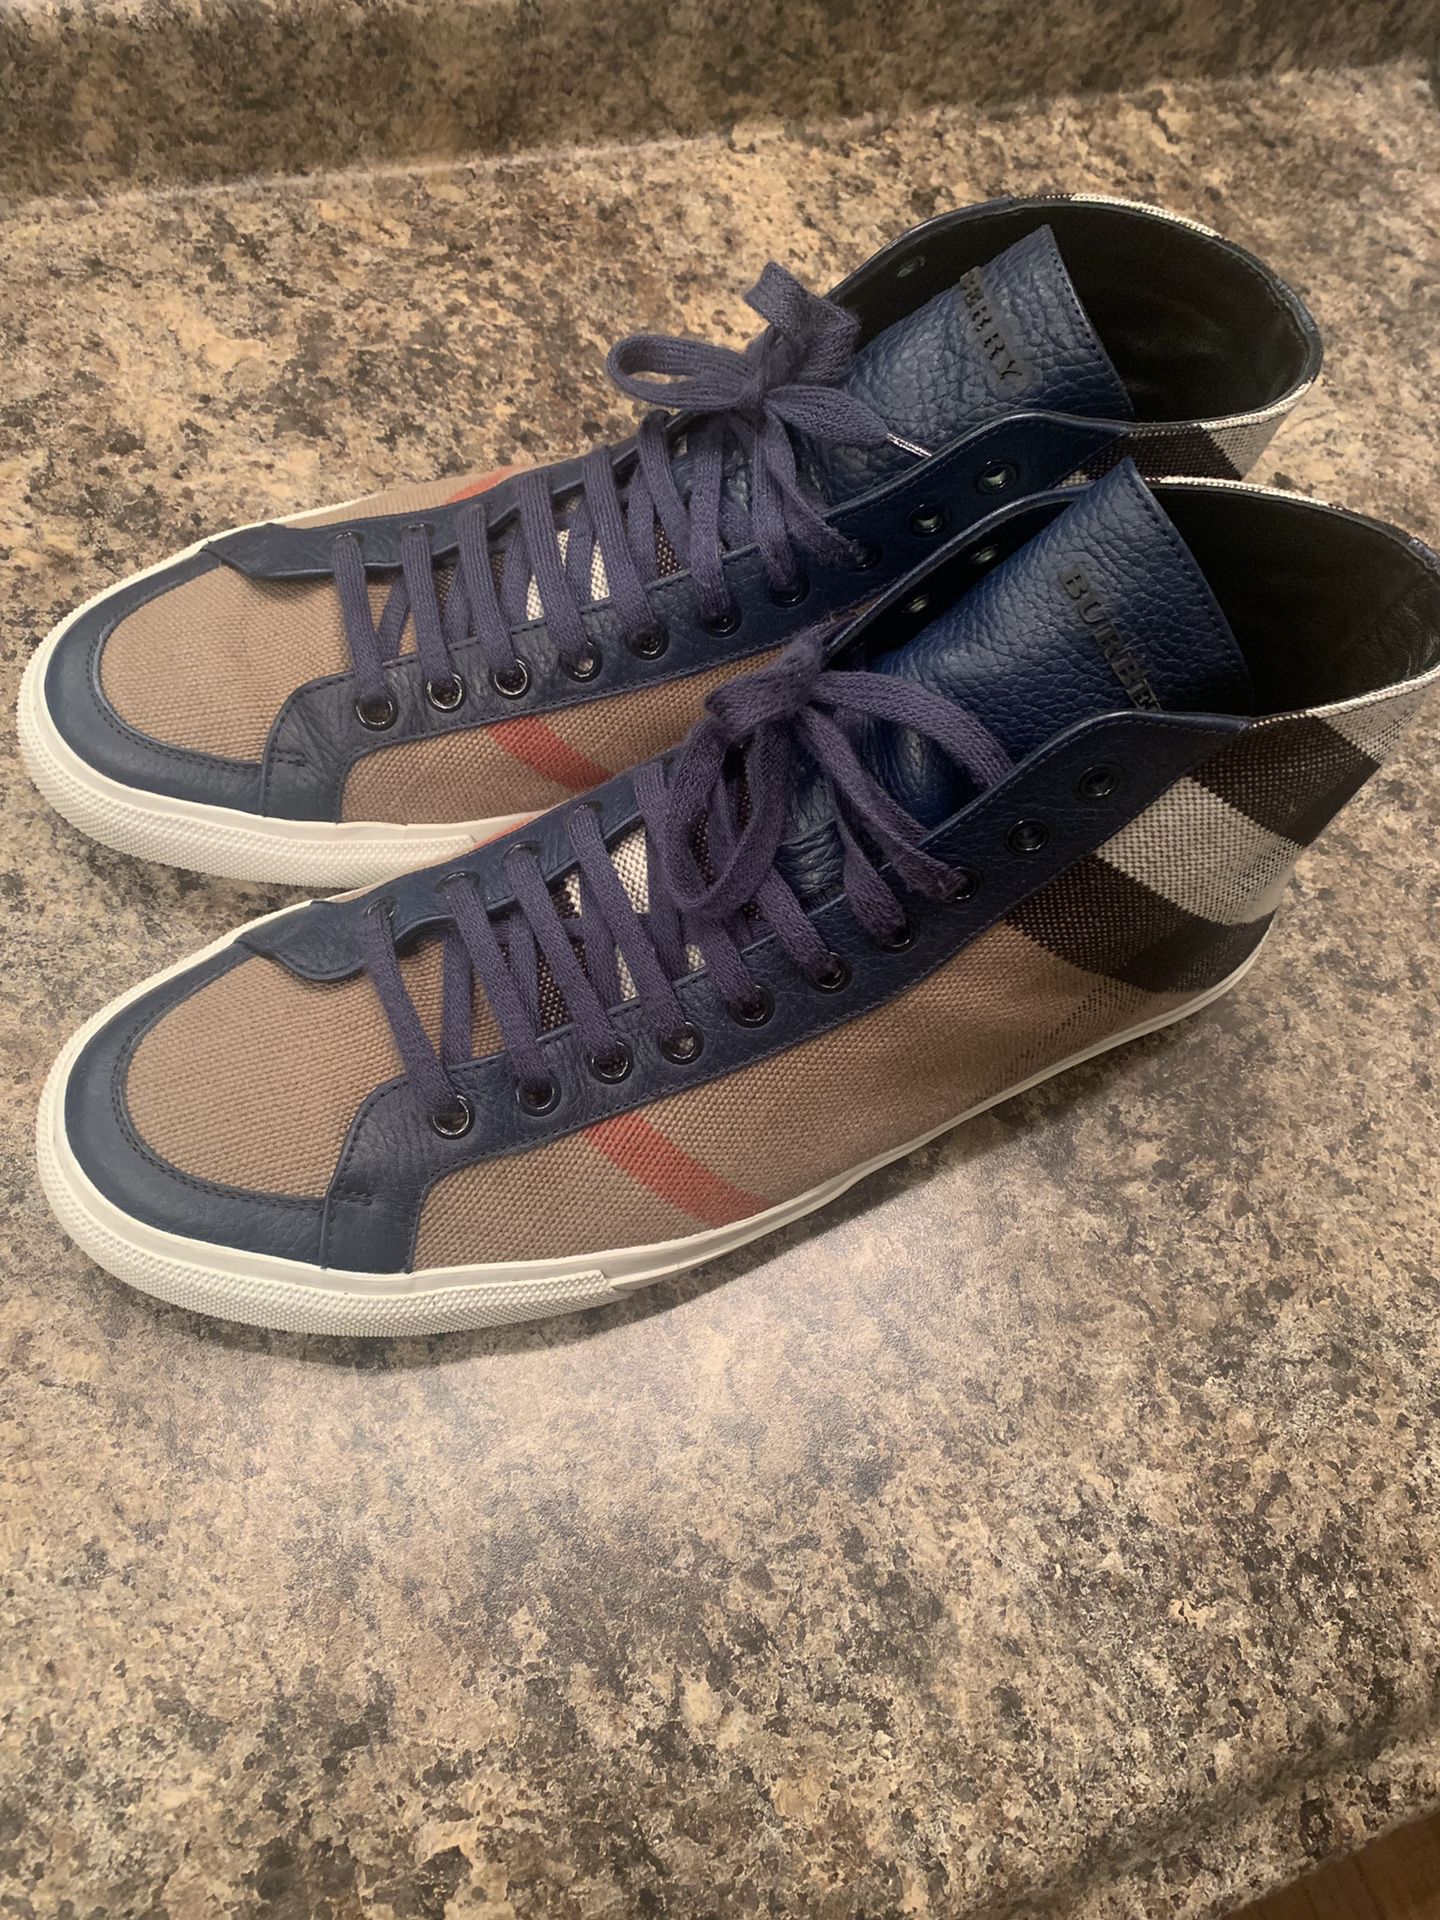 Burberry shoes size 44